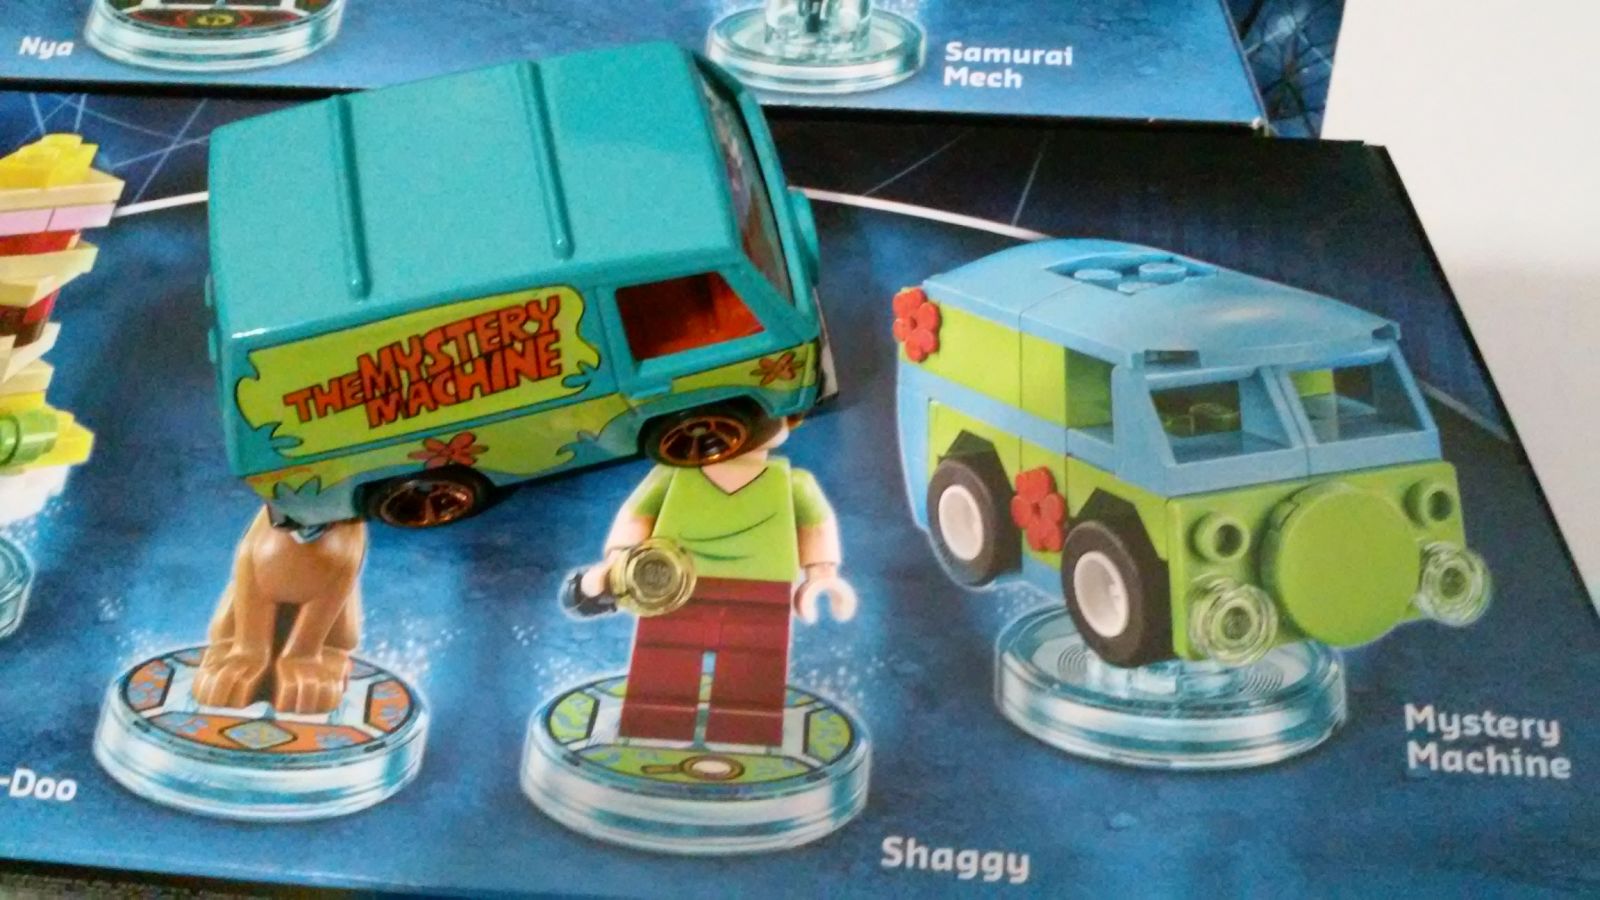 Illustration for article titled Mystery Machine Lego version